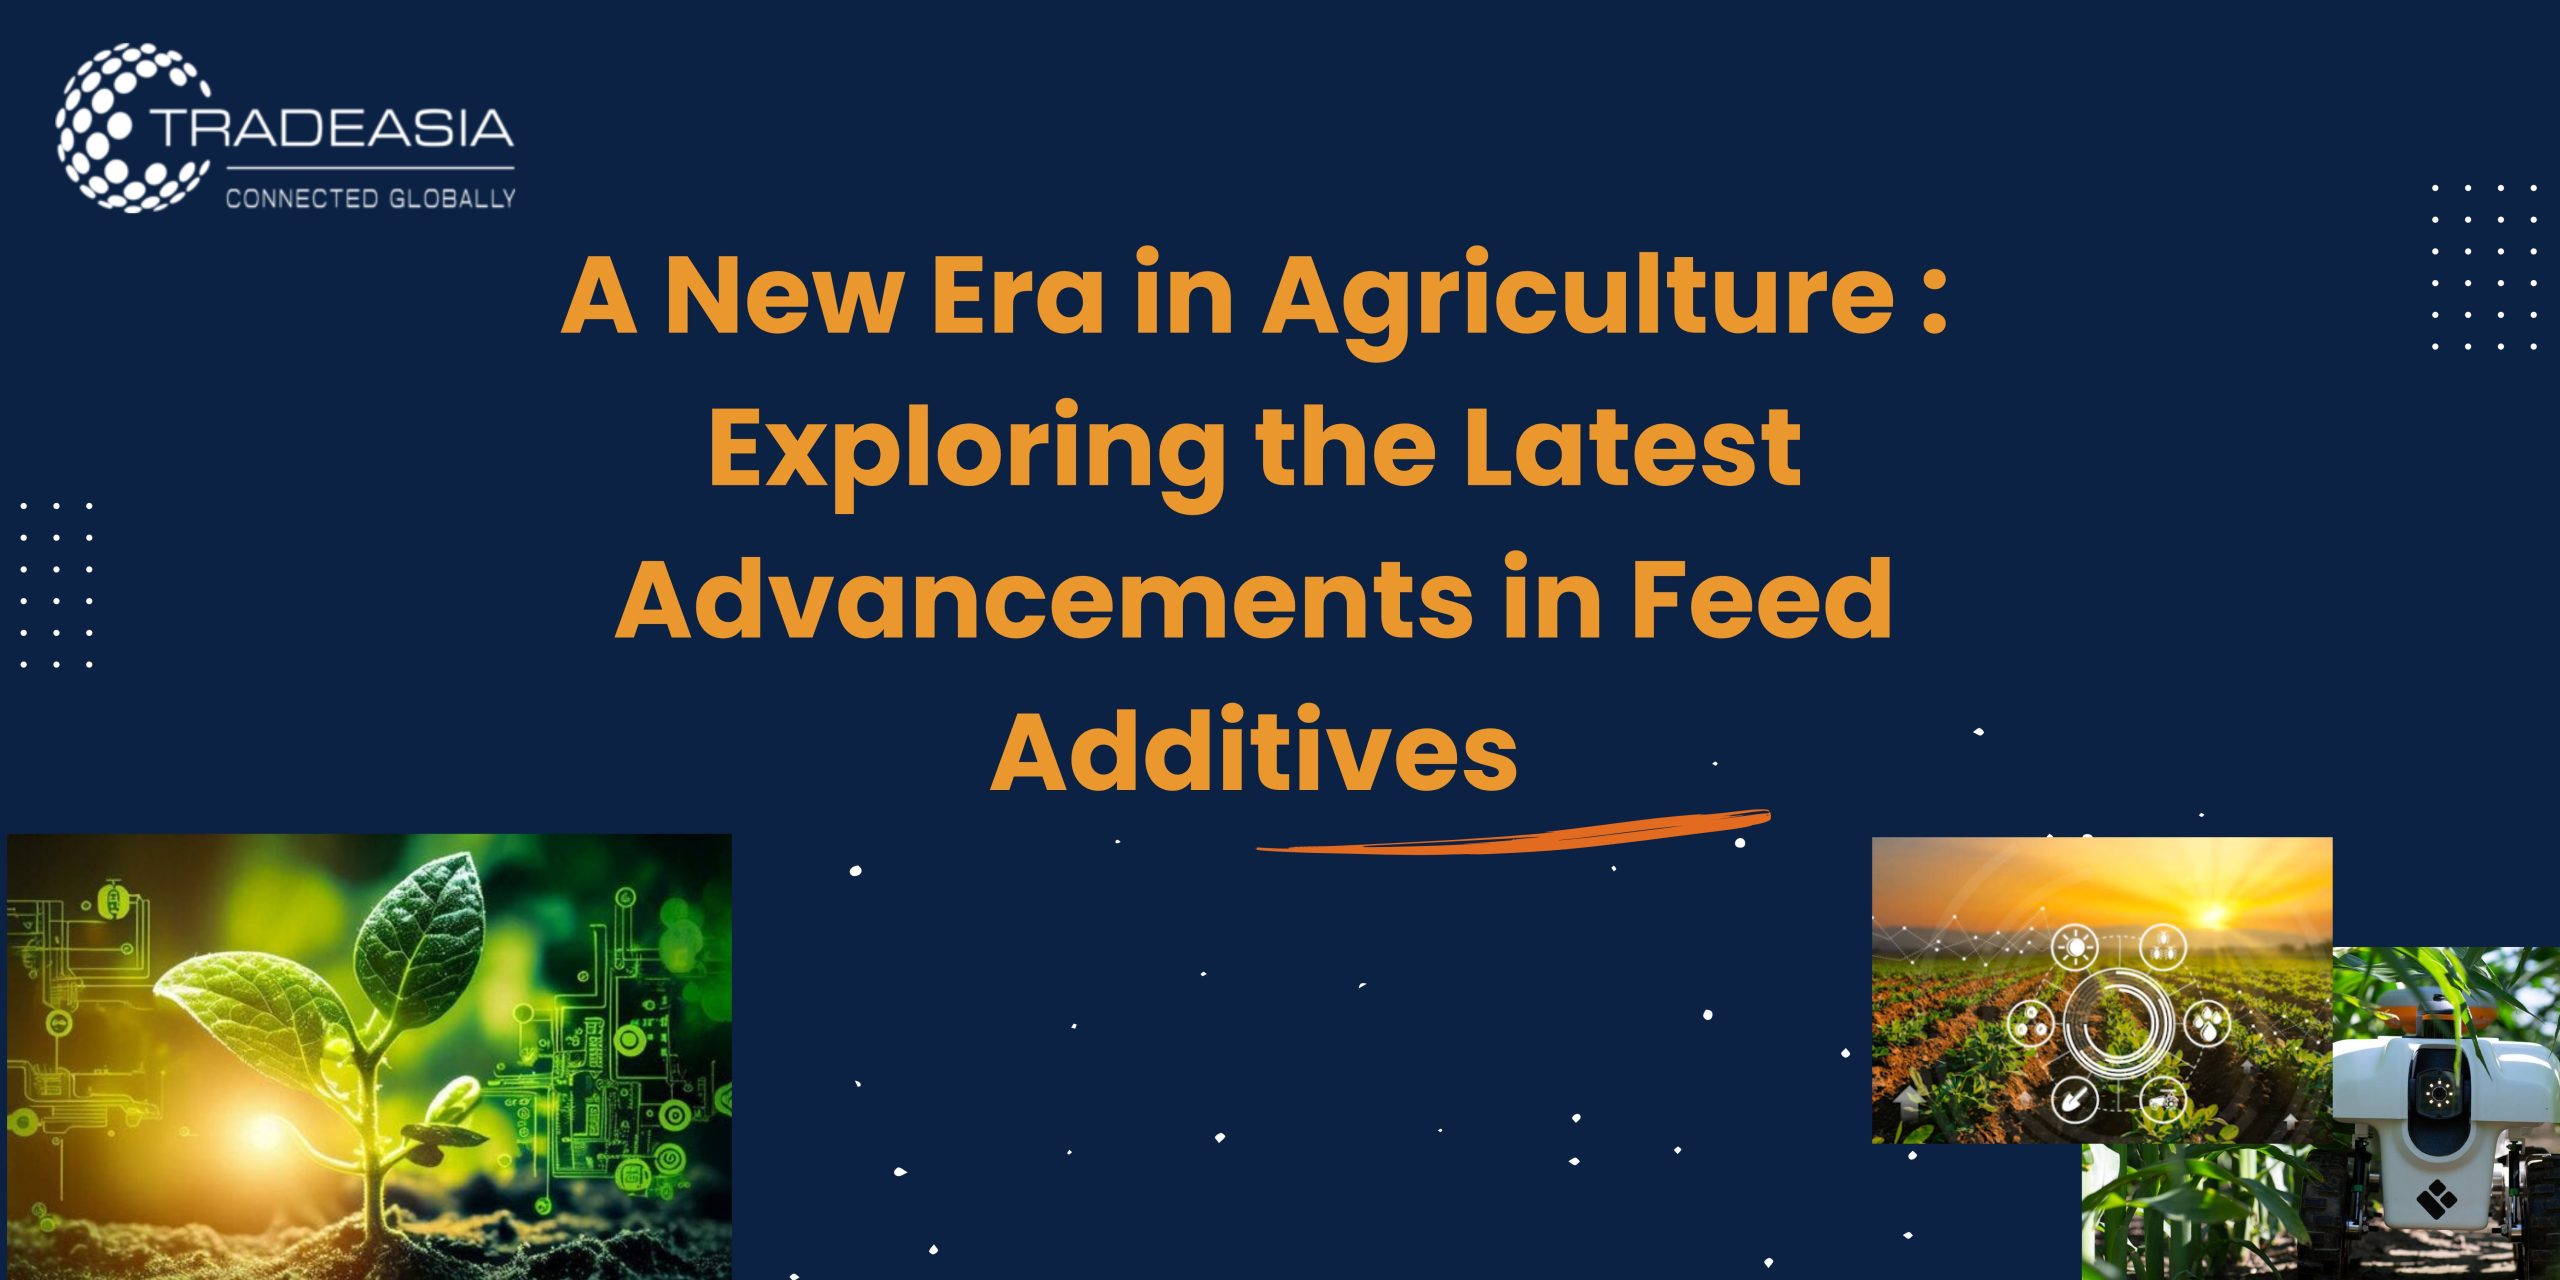 A New Era in Agriculture: Exploring the Latest Advancements in Feed Additives